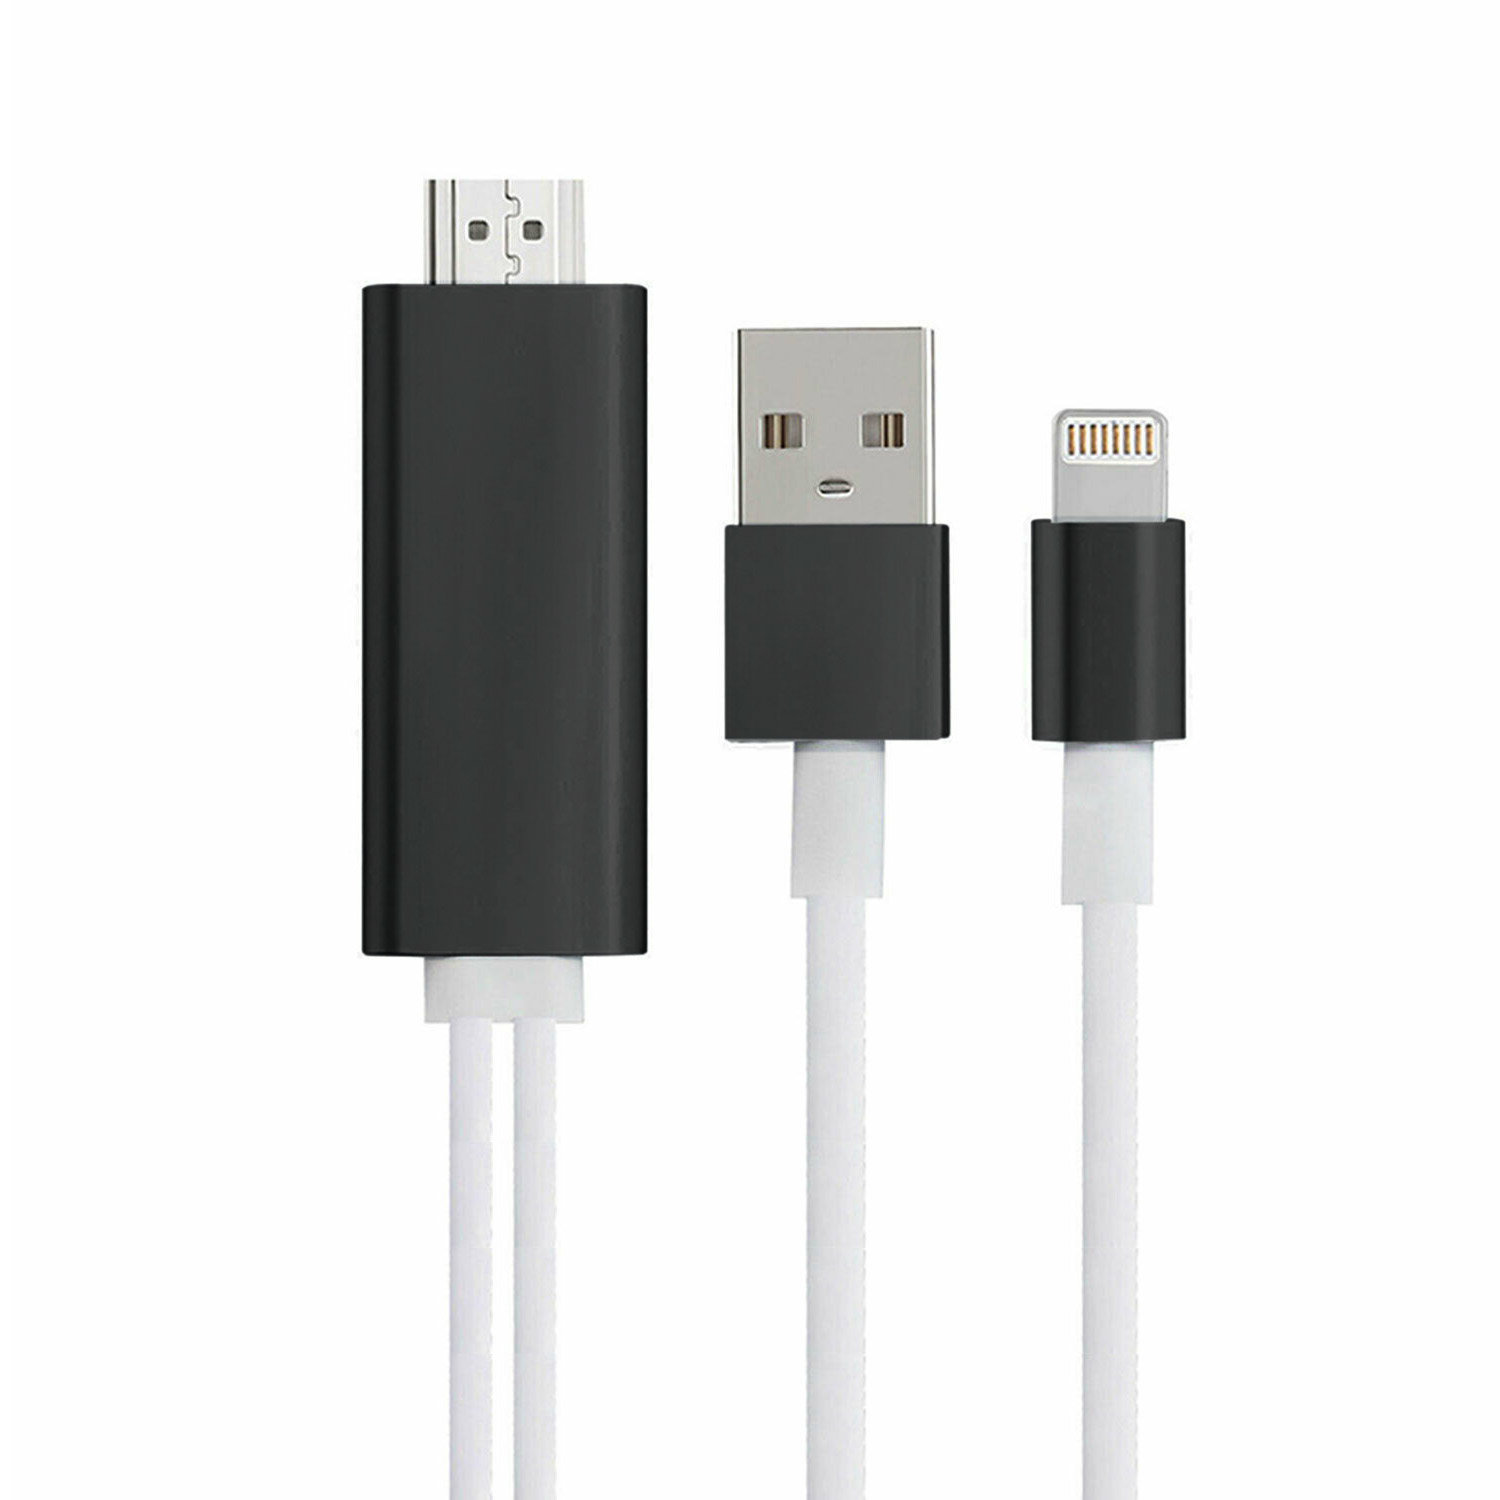 Aquarius 1080p PD HDMI Adapter with USB-A and Lightning Cables - For iPhone and iPads